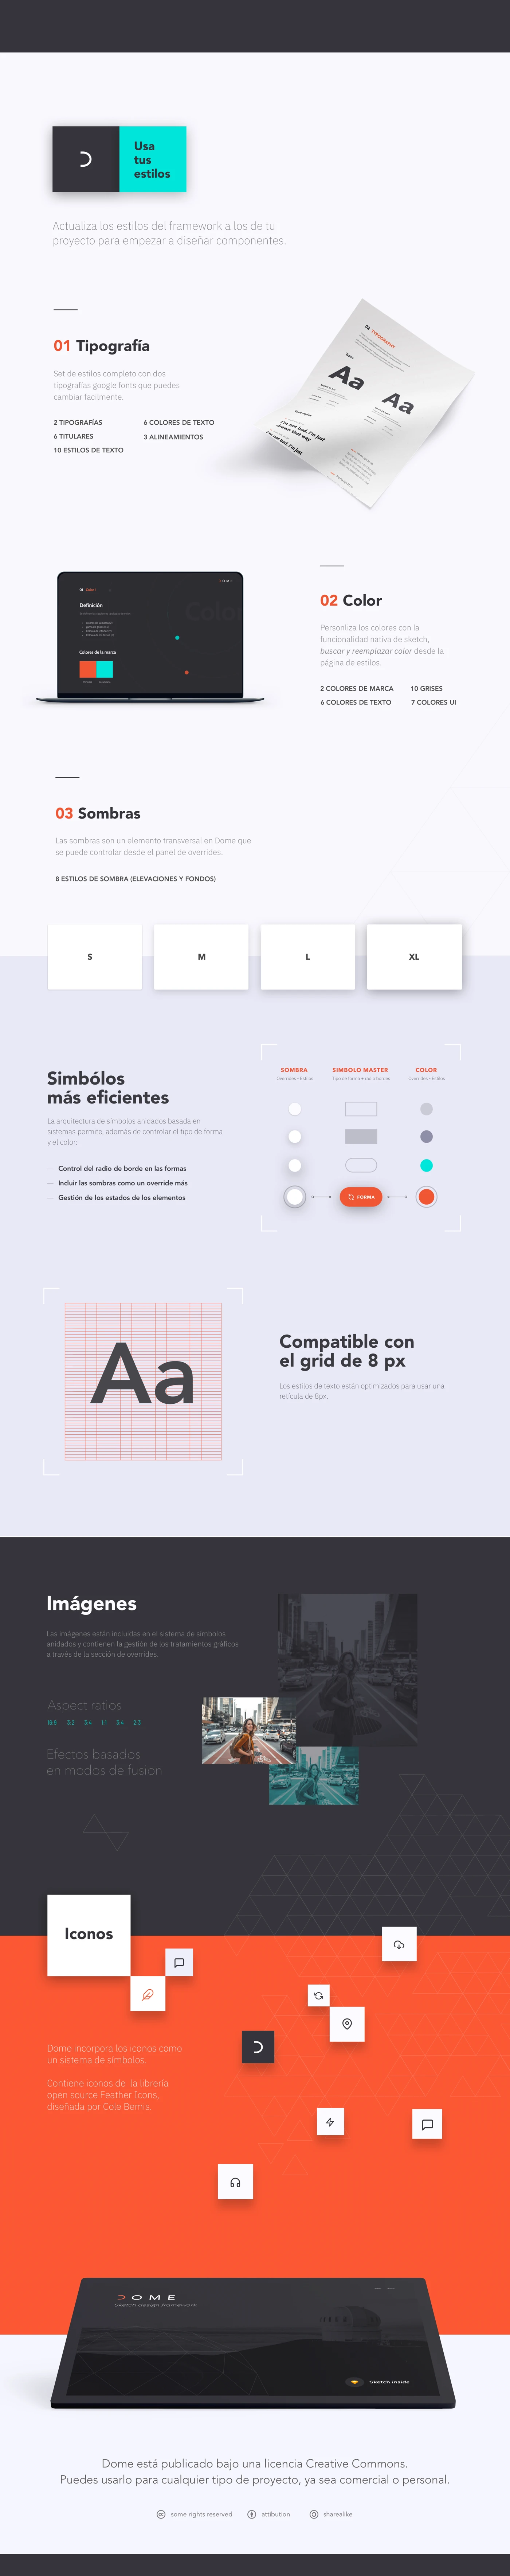 Dome Design System Framework - Dome is a set of styles and symbols that allow you to create a design system from scratch. You will find shapes, states, graphic treatment of images are defined as styles and also a complete set of text styles (6 headlines, 10 text styles and buttons) easily editable and customizable.